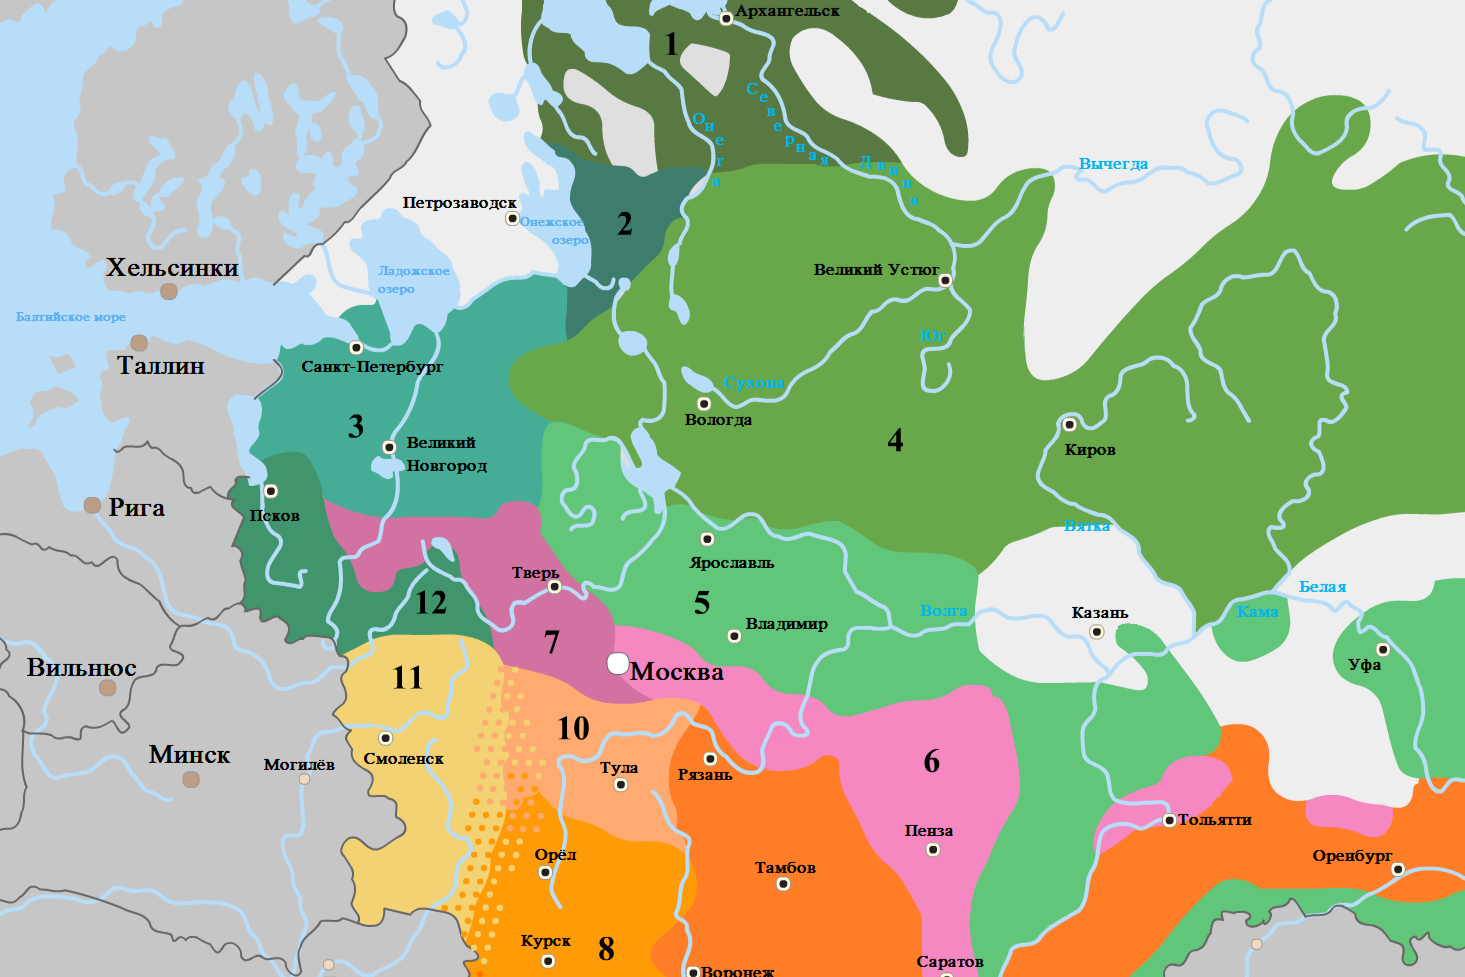 Roman Ronko | Database of the Dialectal Atlas of the Russian language